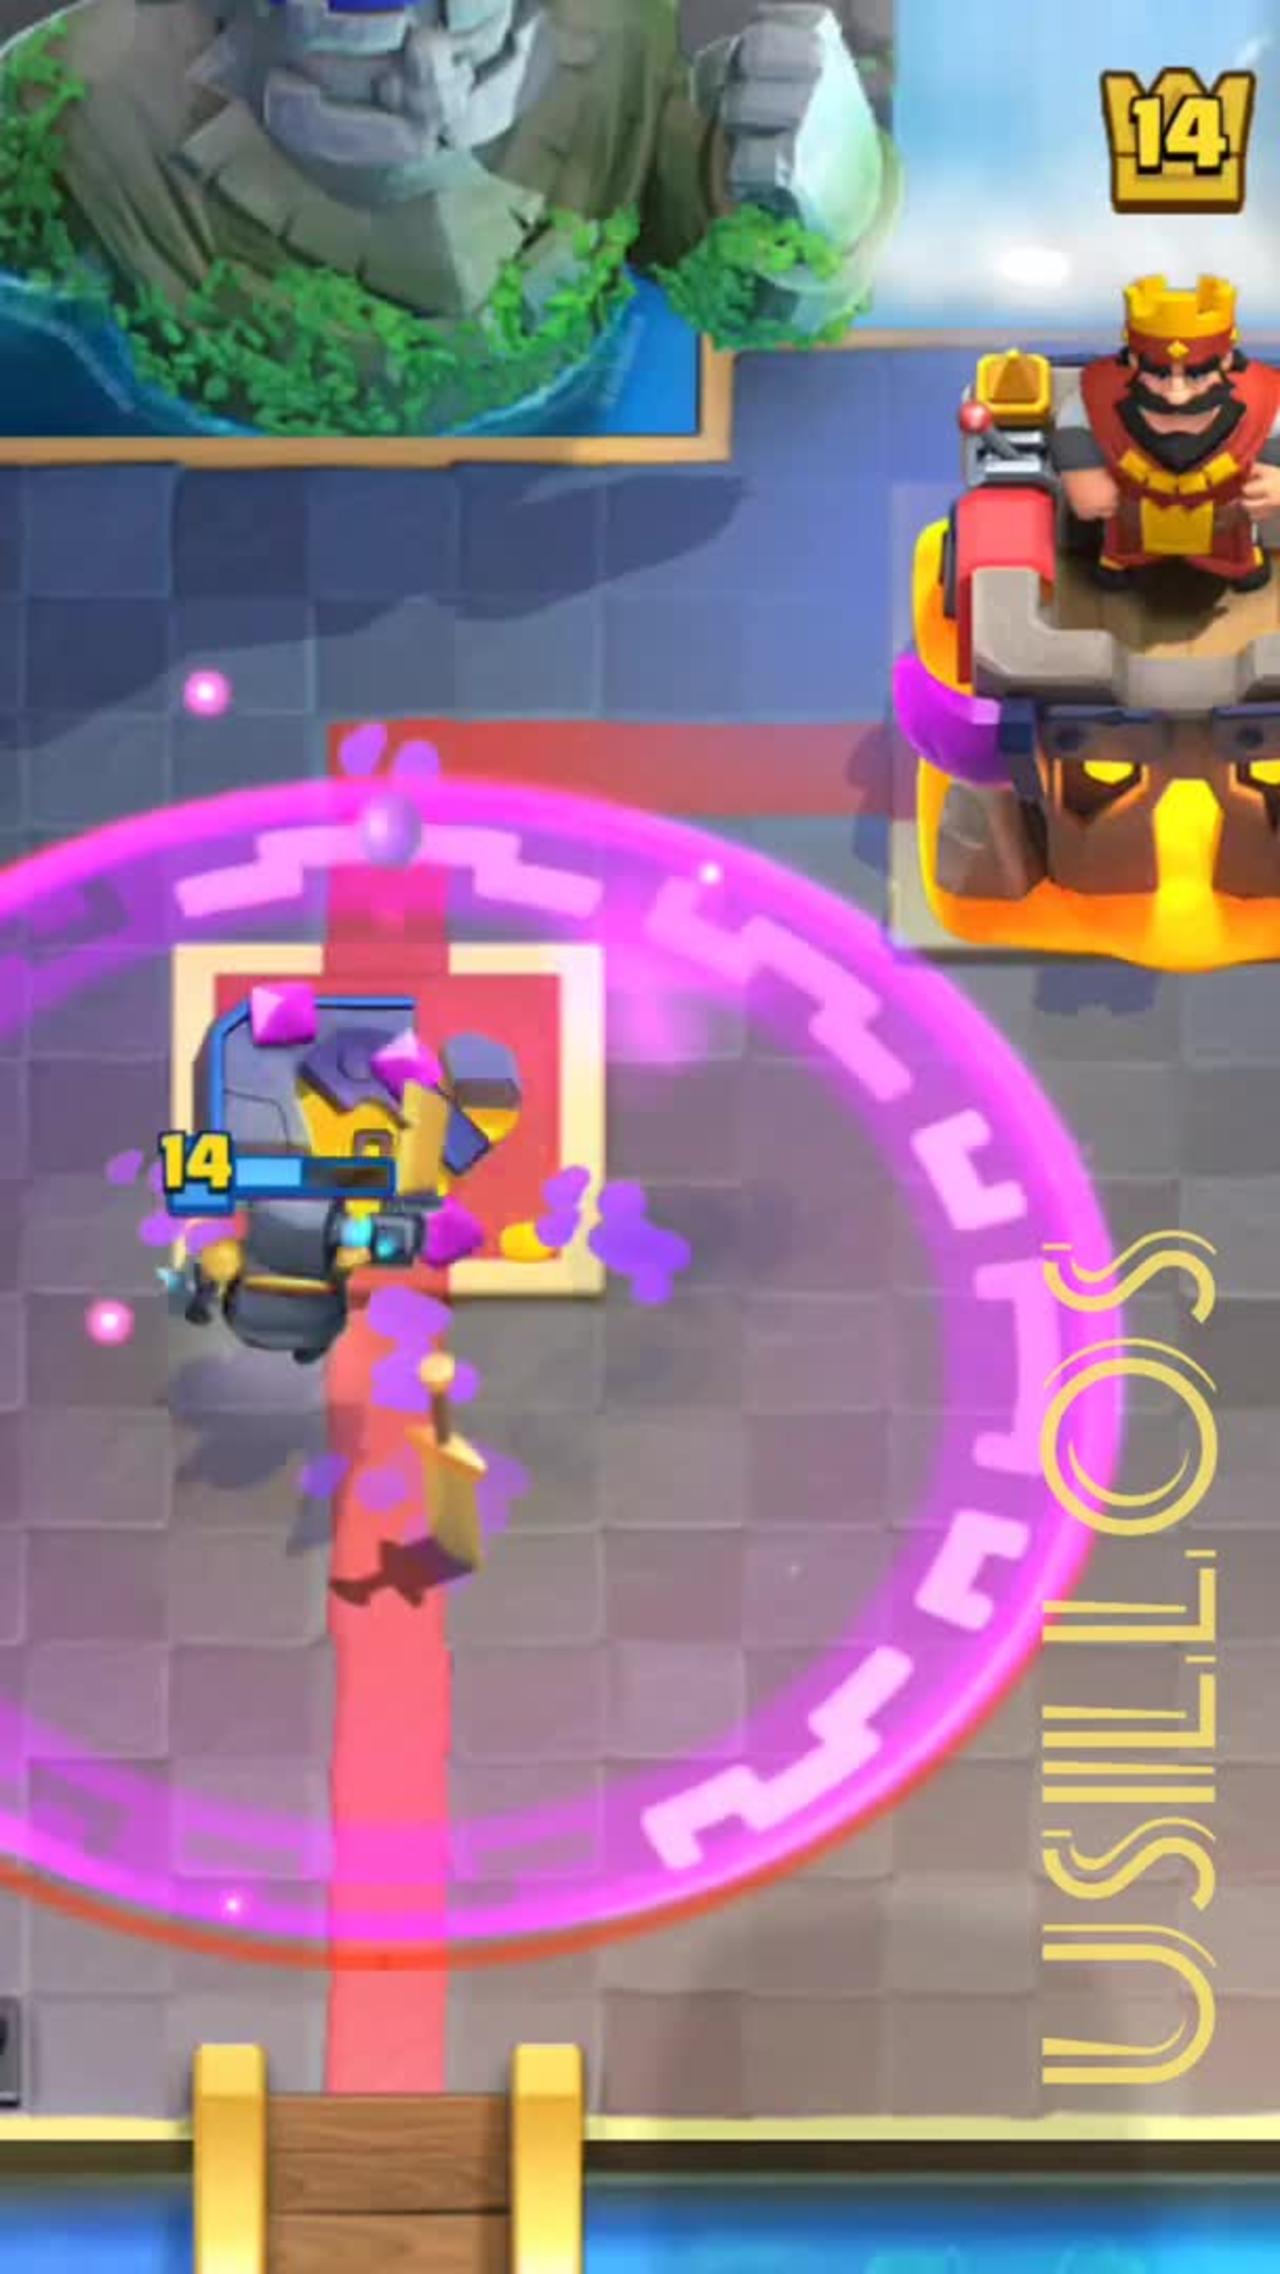 ✔THE ELECTRIC WIZARD MAKES A STELLAR CAMEO IN THE GAME 😂😂😂 Clash Royale 2022 by Usillos